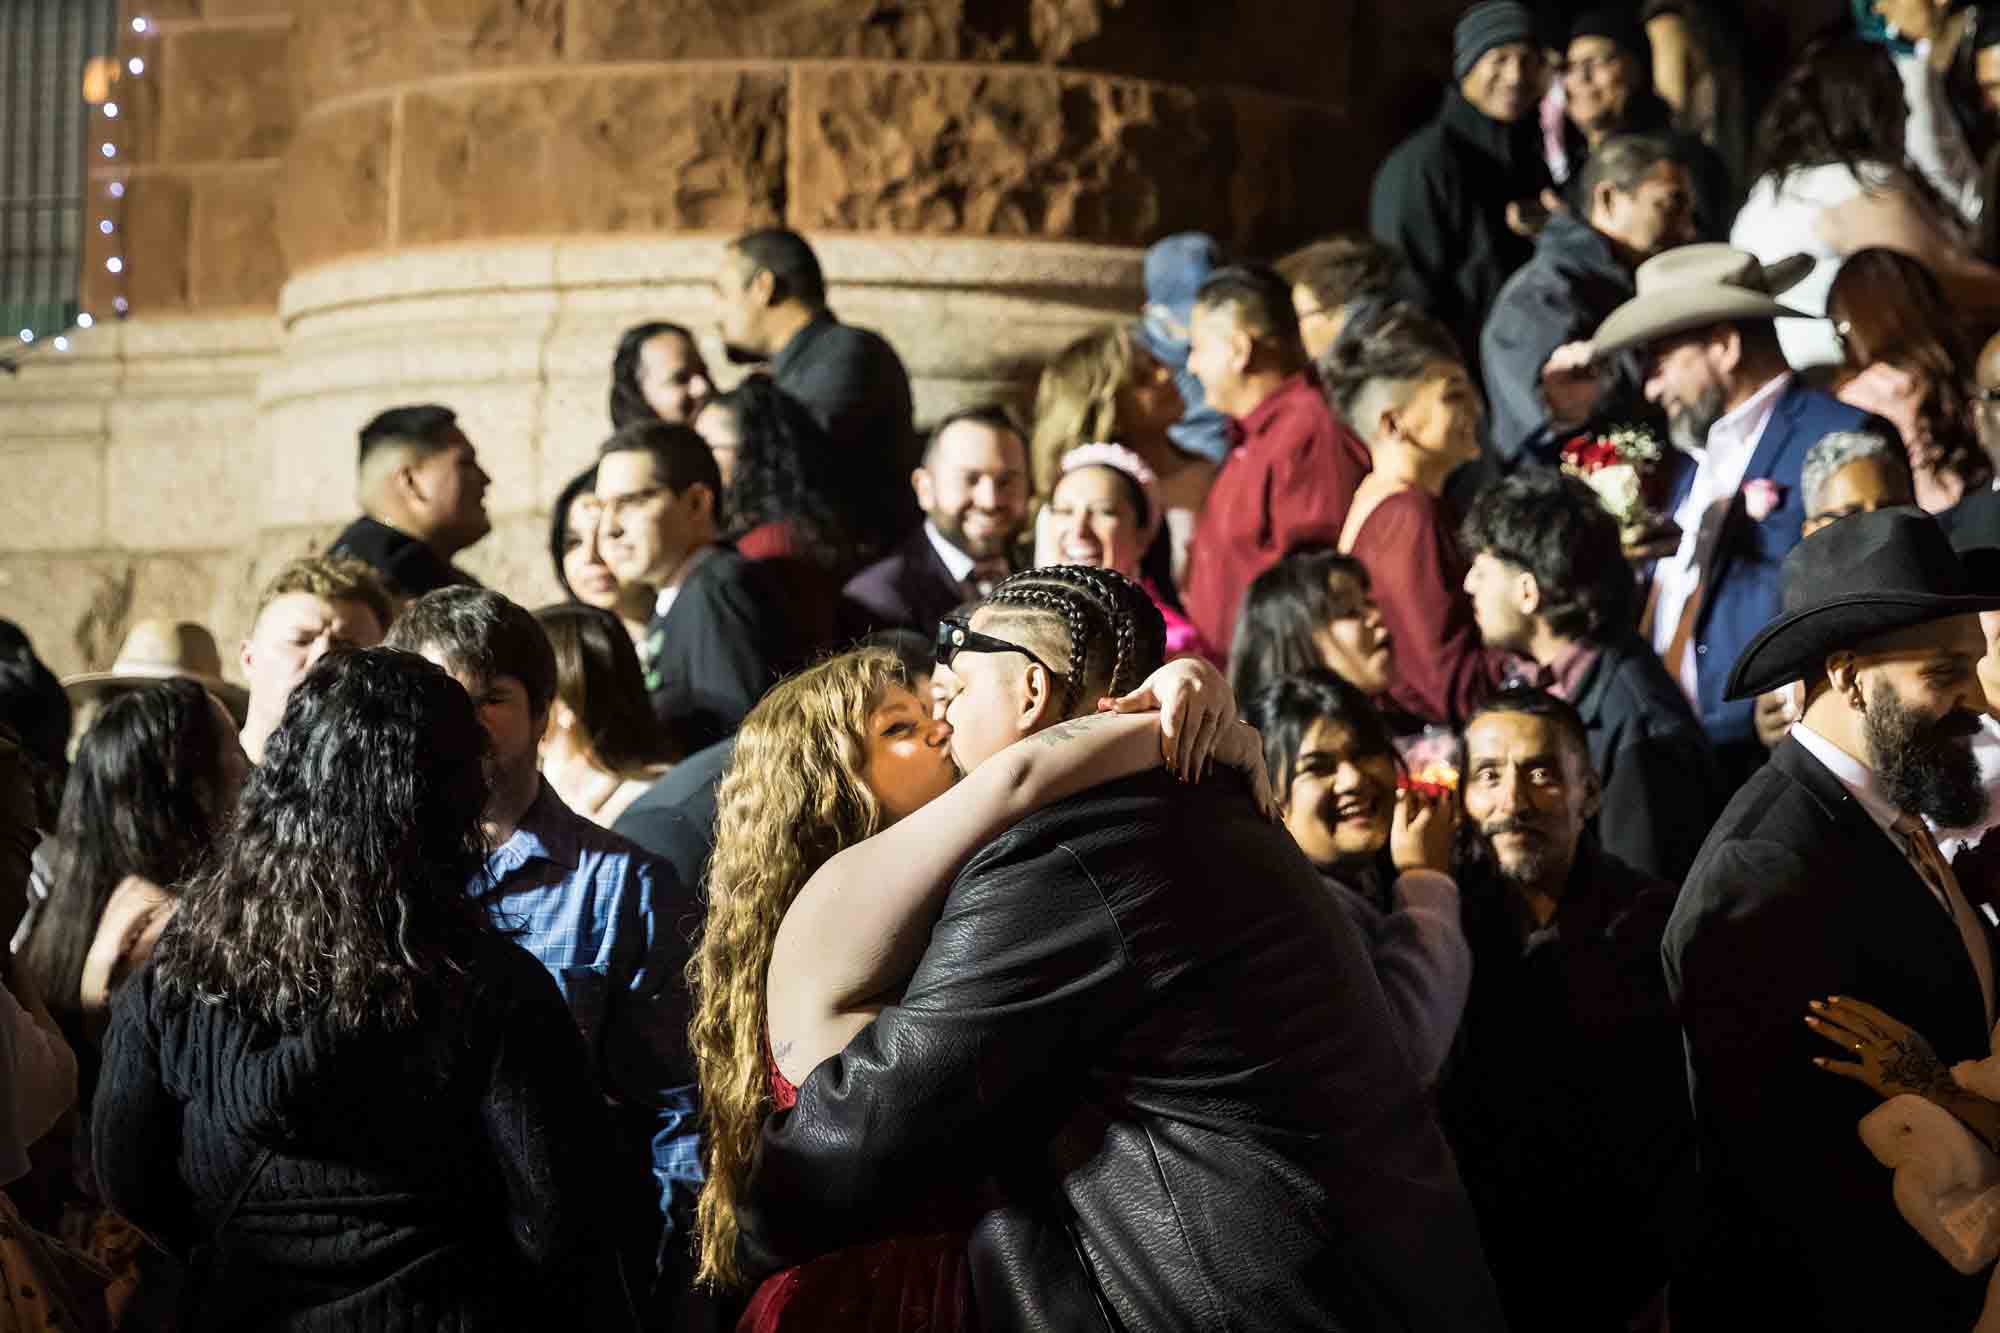 Crowd of bride and grooms kissing in front of courthouse steps at night for an article on the Bexar county mass wedding event